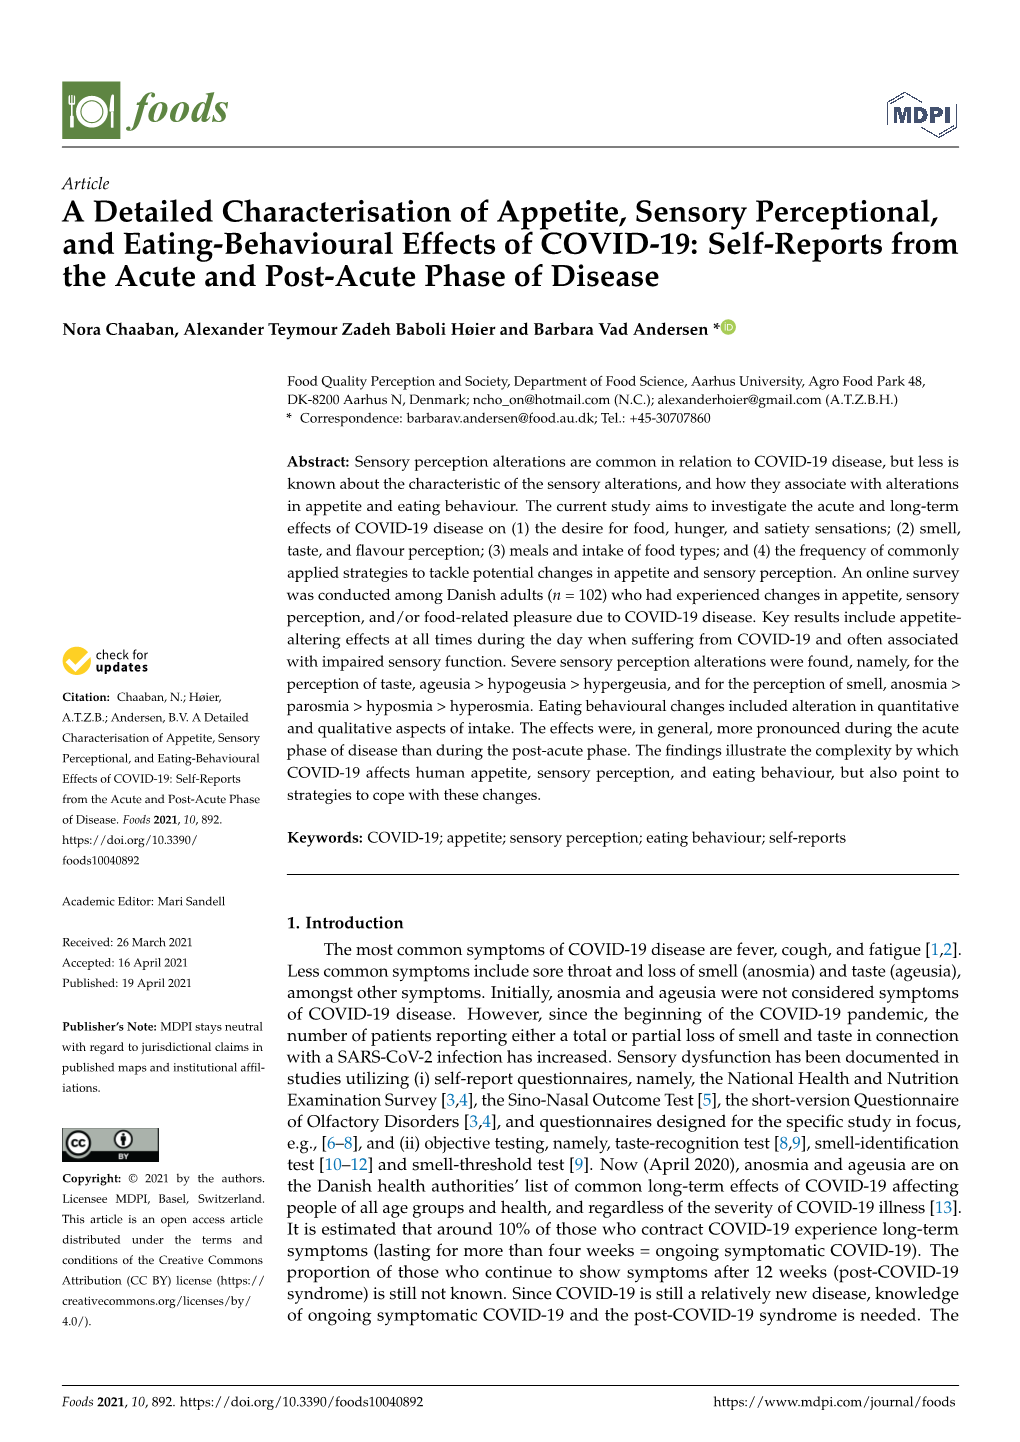 A Detailed Characterisation of Appetite, Sensory Perceptional, and Eating-Behavioural Effects of COVID-19: Self-Reports from the Acute and Post-Acute Phase of Disease